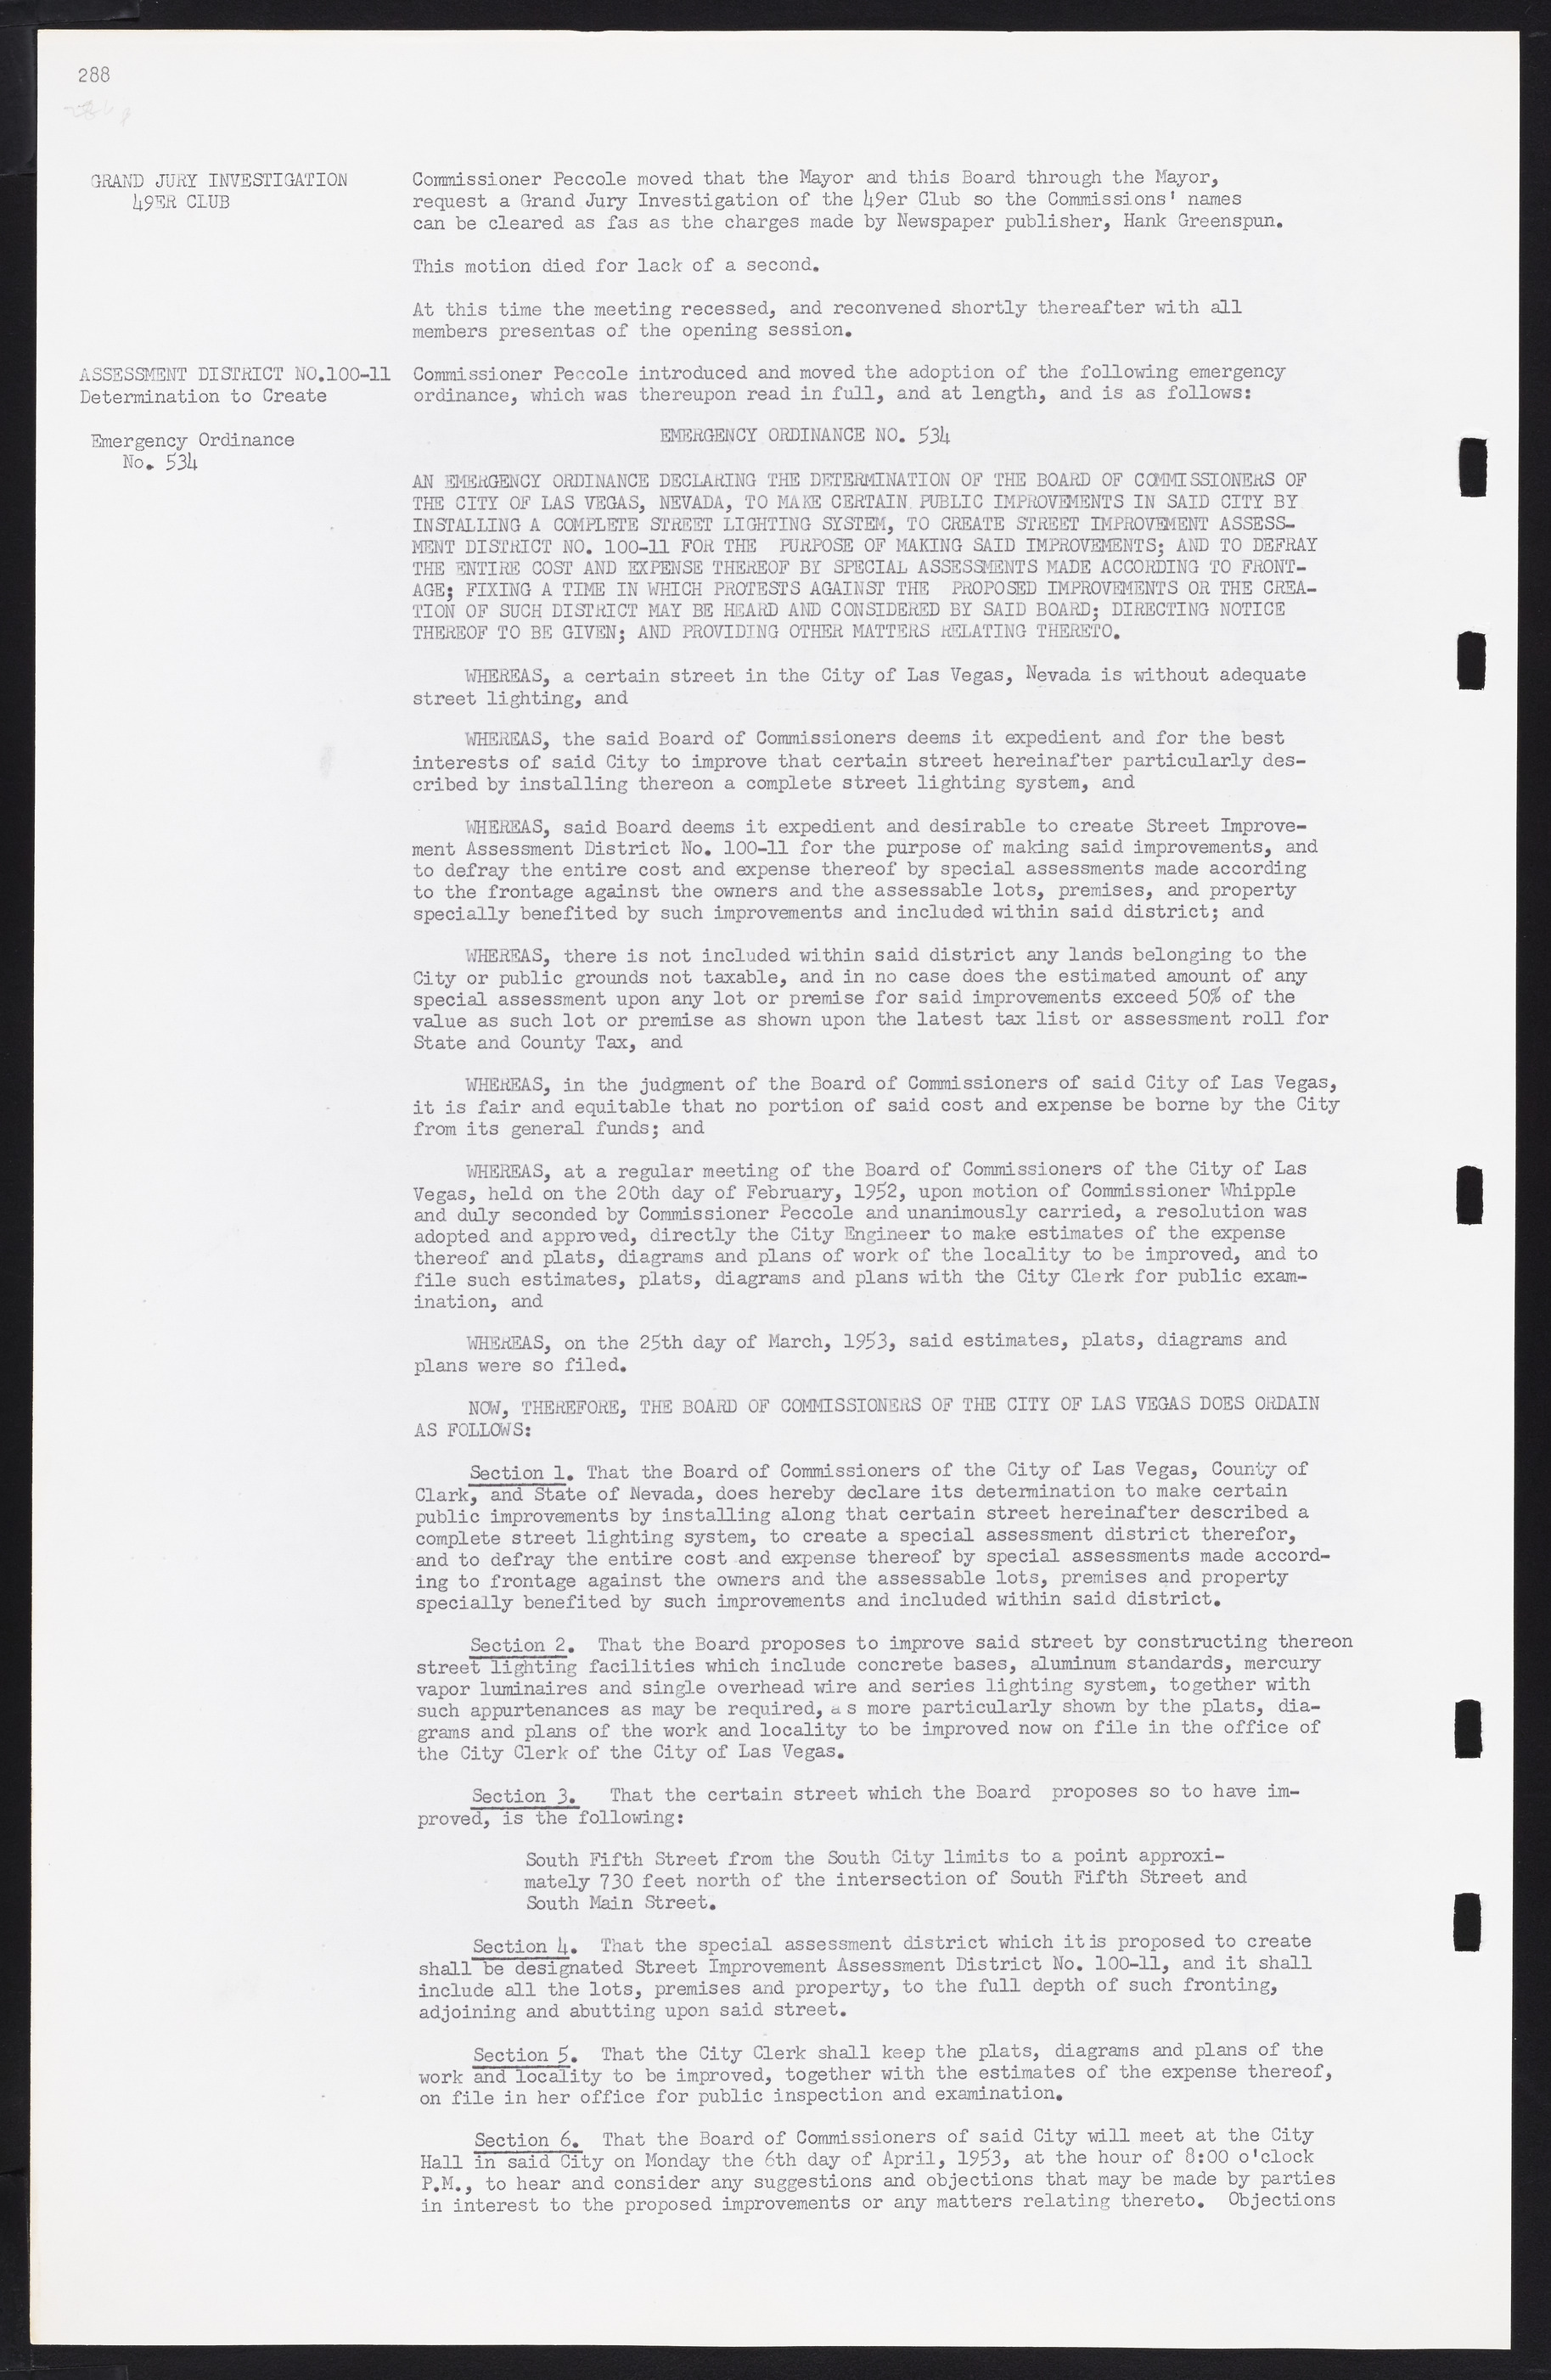 Las Vegas City Commission Minutes, May 26, 1952 to February 17, 1954, lvc000008-304